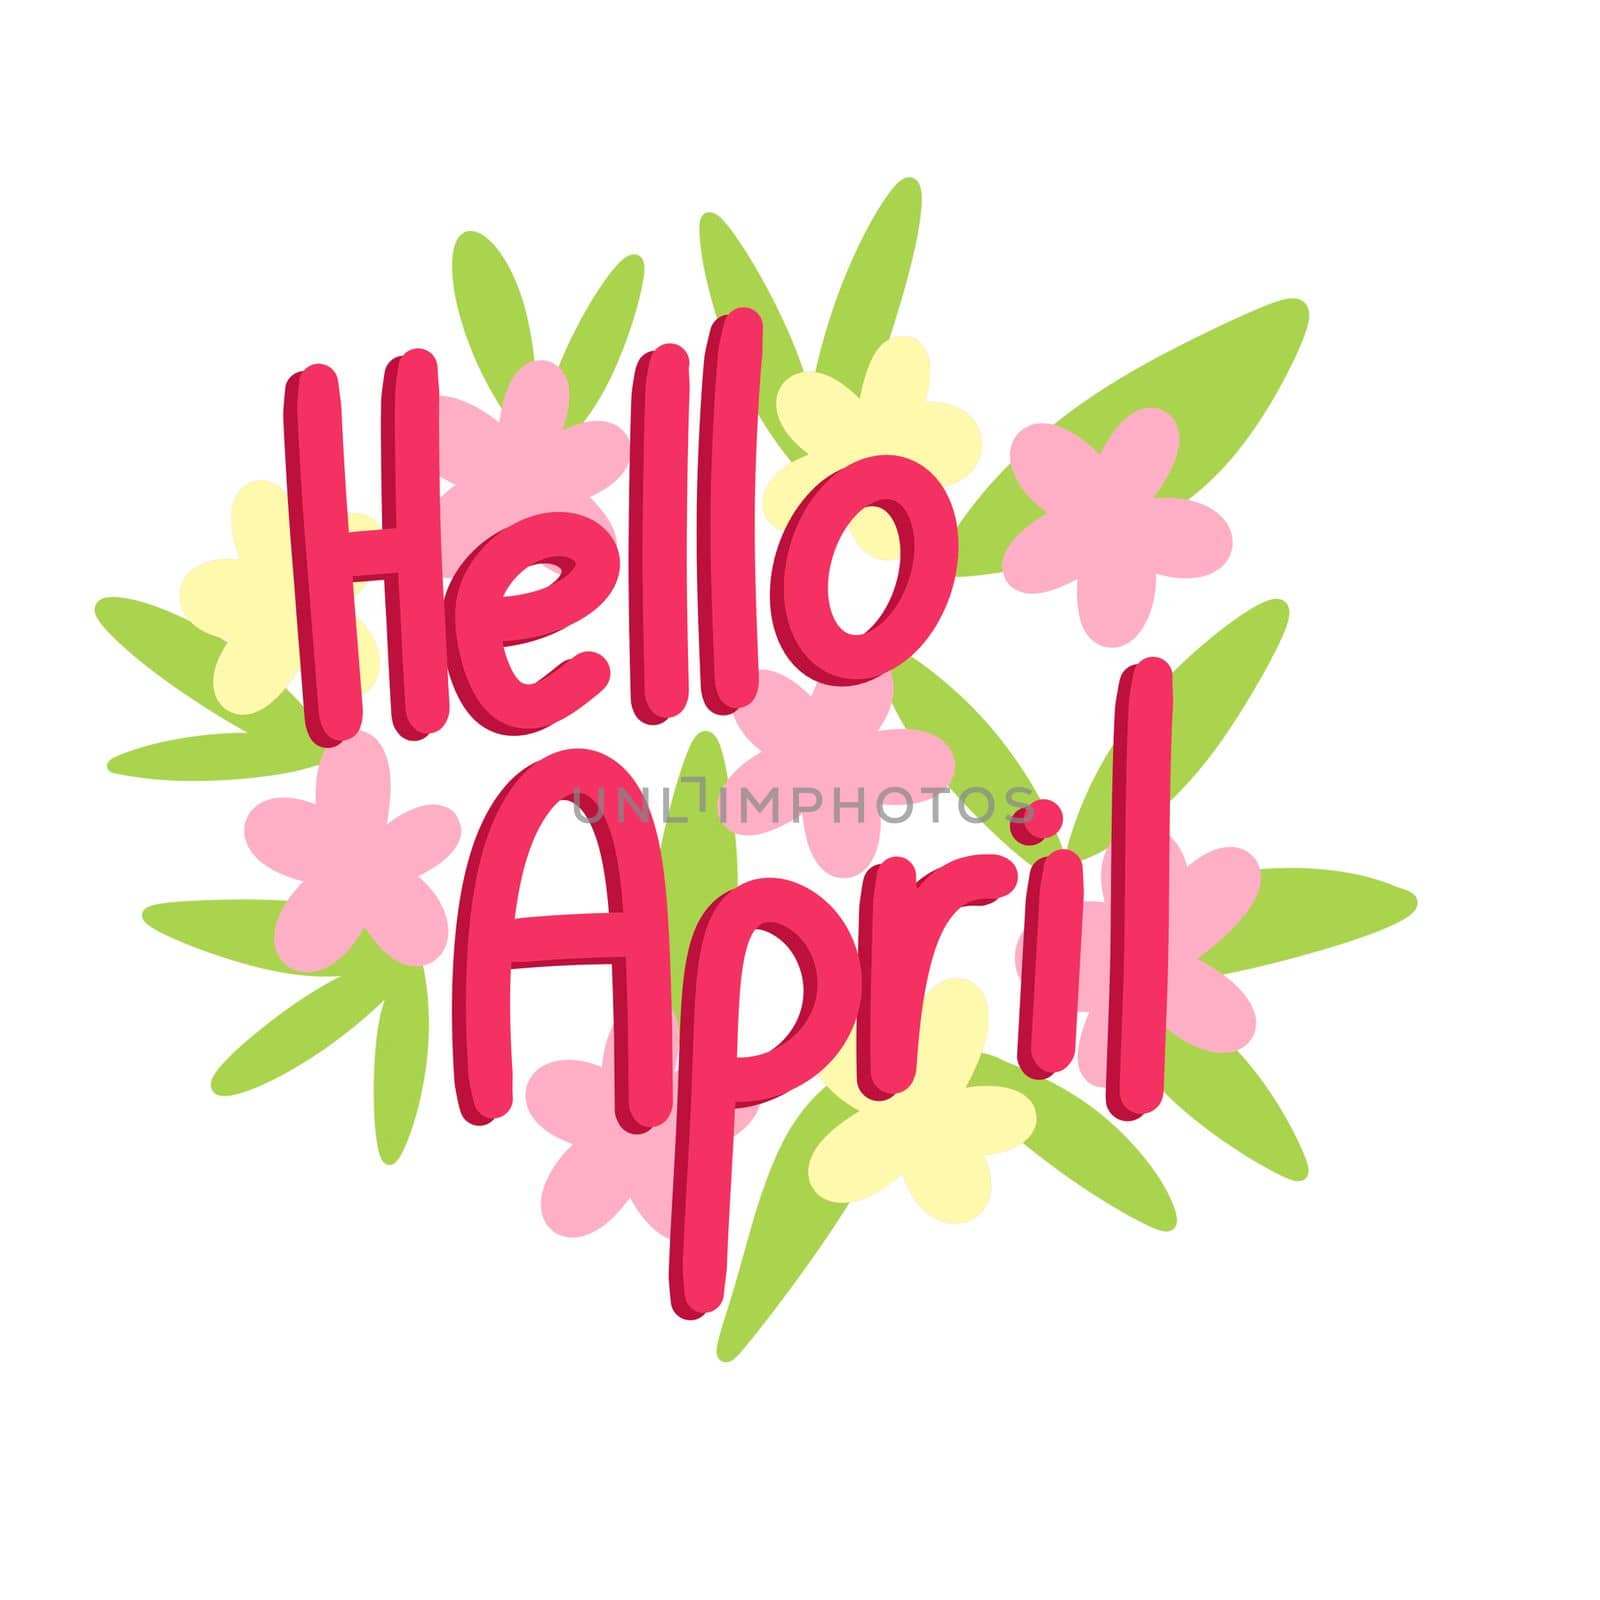 Hello April hand drawn illustration. Spring sticker banner card greeting in pastel colors with flowers leaves nature colorful flora, scrapbooking bullet journal label, lettering calligraphy words